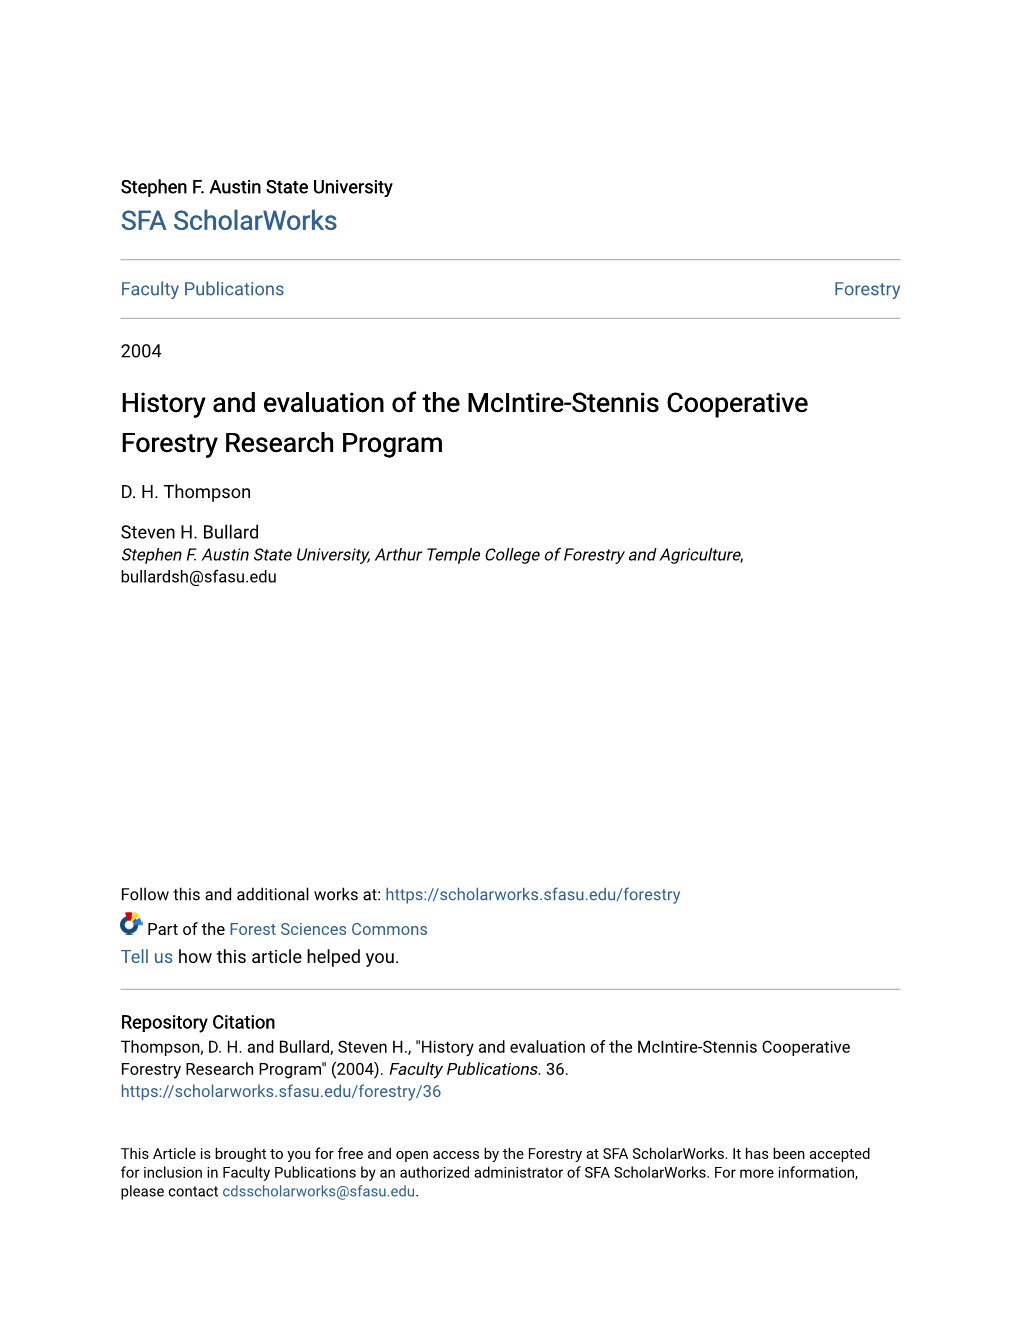 History and Evaluation of the Mcintire-Stennis Cooperative Forestry Research Program